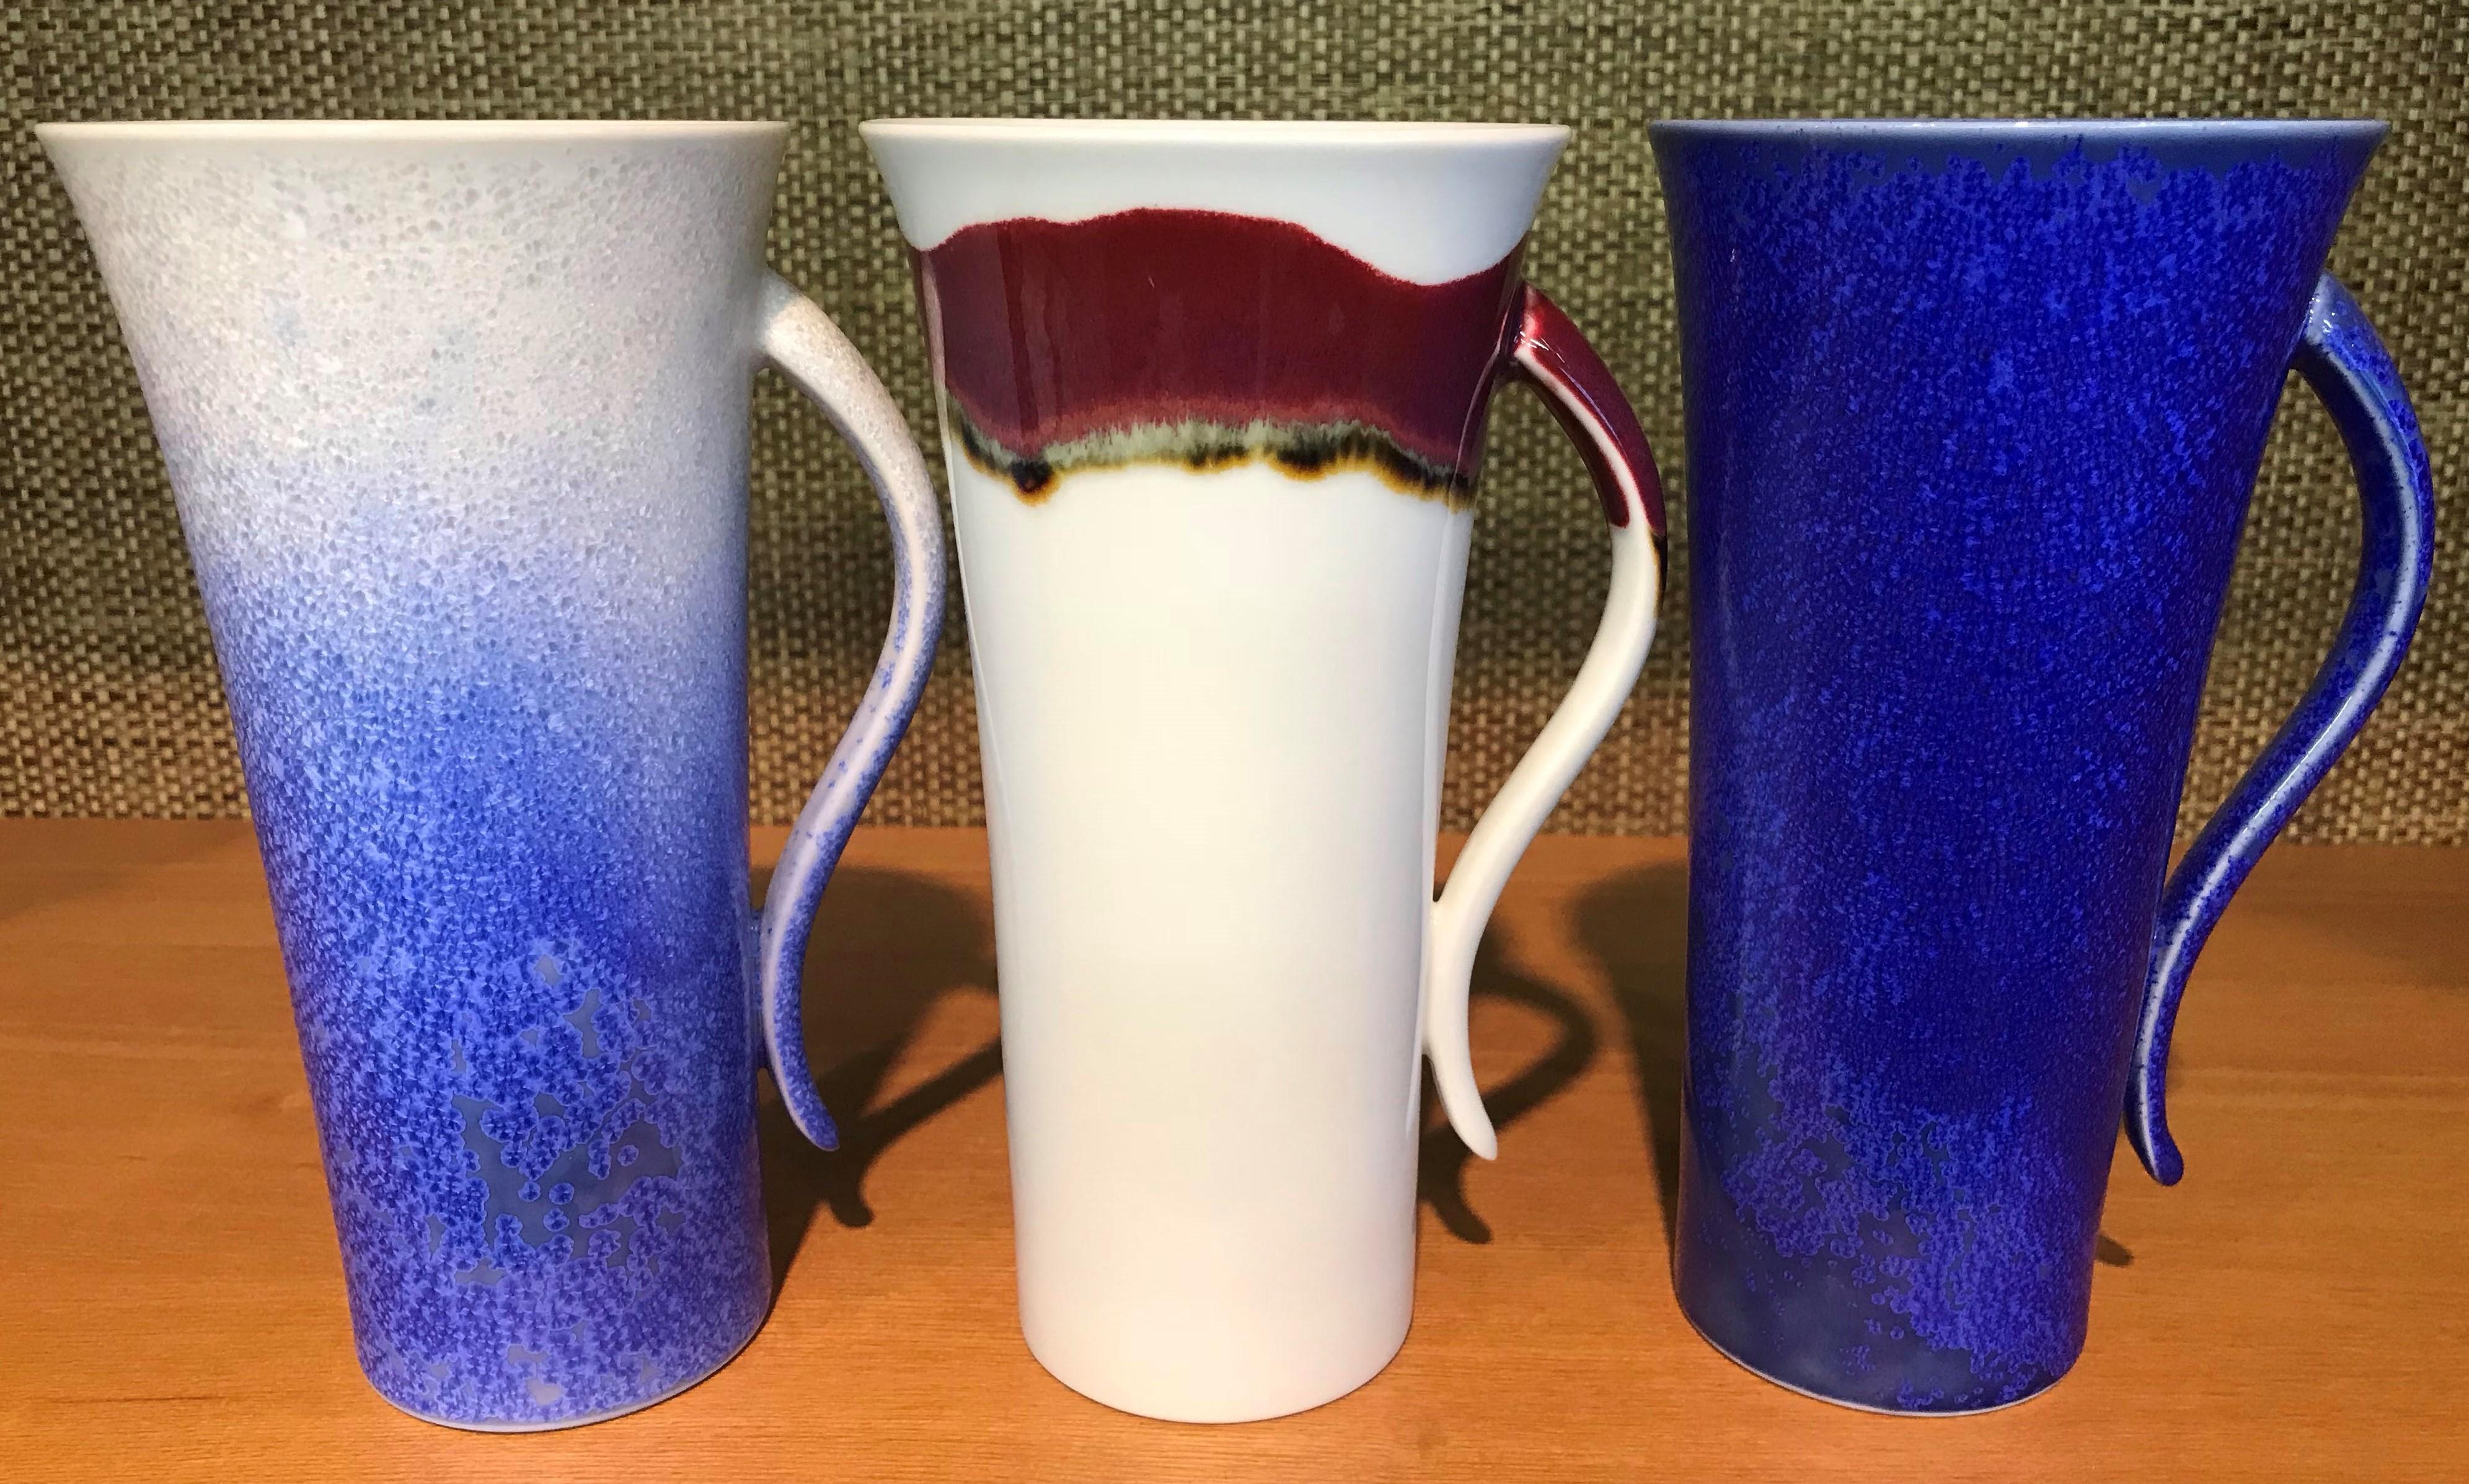 Set of three unique contemporary tall Japanese hand-glazed porcelain mug cups in a beautiful shape artistically glazed in wine-red, blue and white, signed pieces by widely respected award-winning master porcelain artist in 